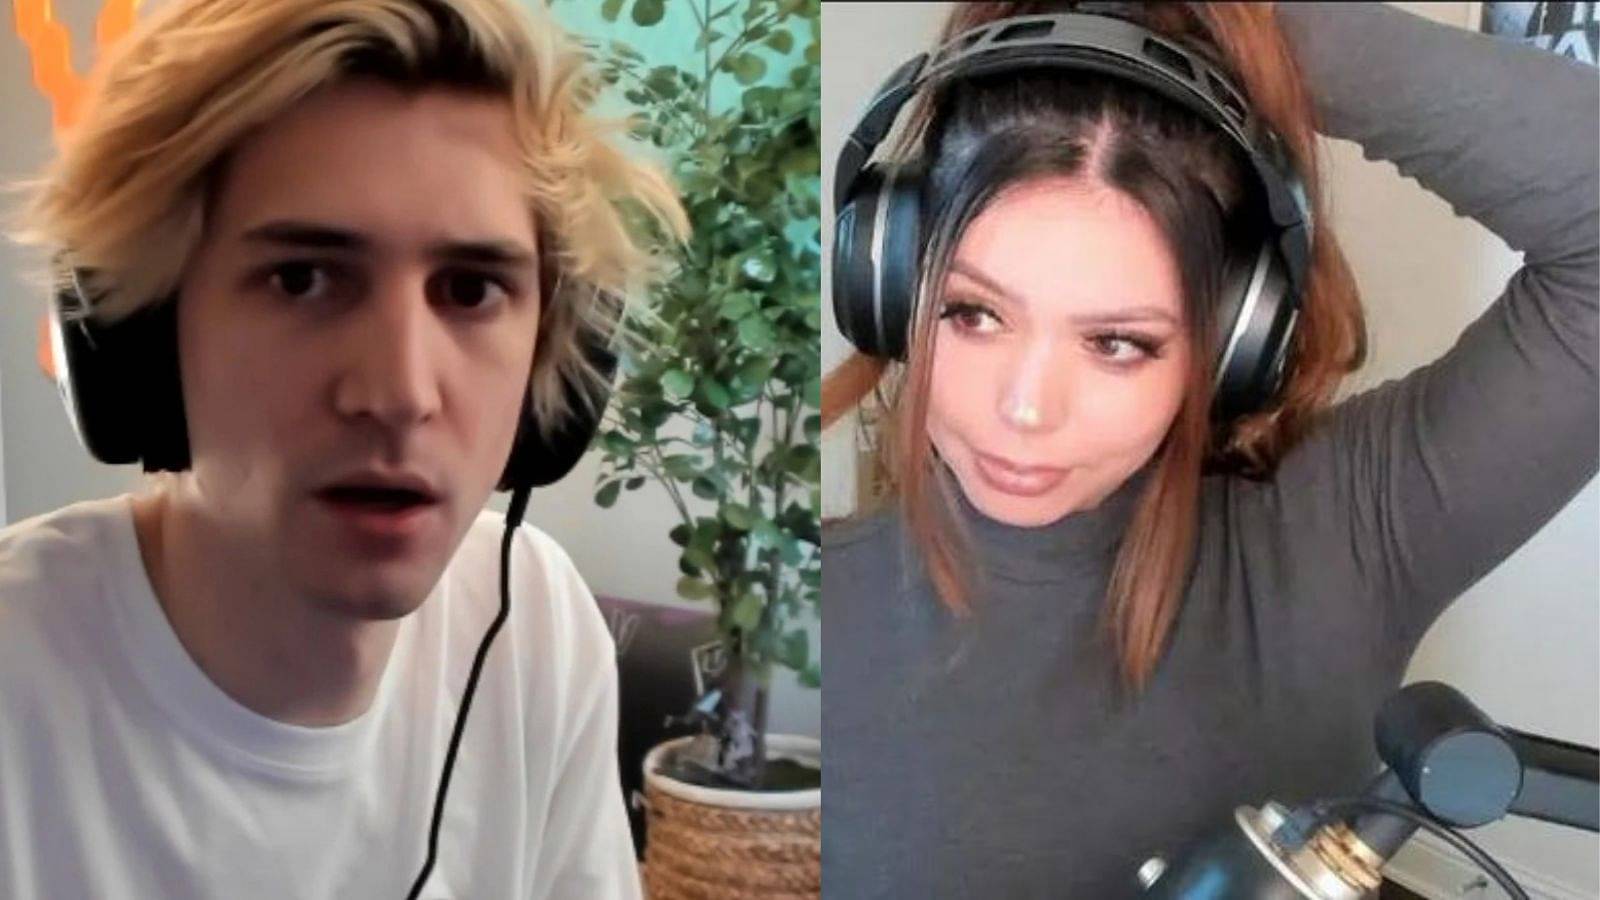 new details about xqc adept marriage